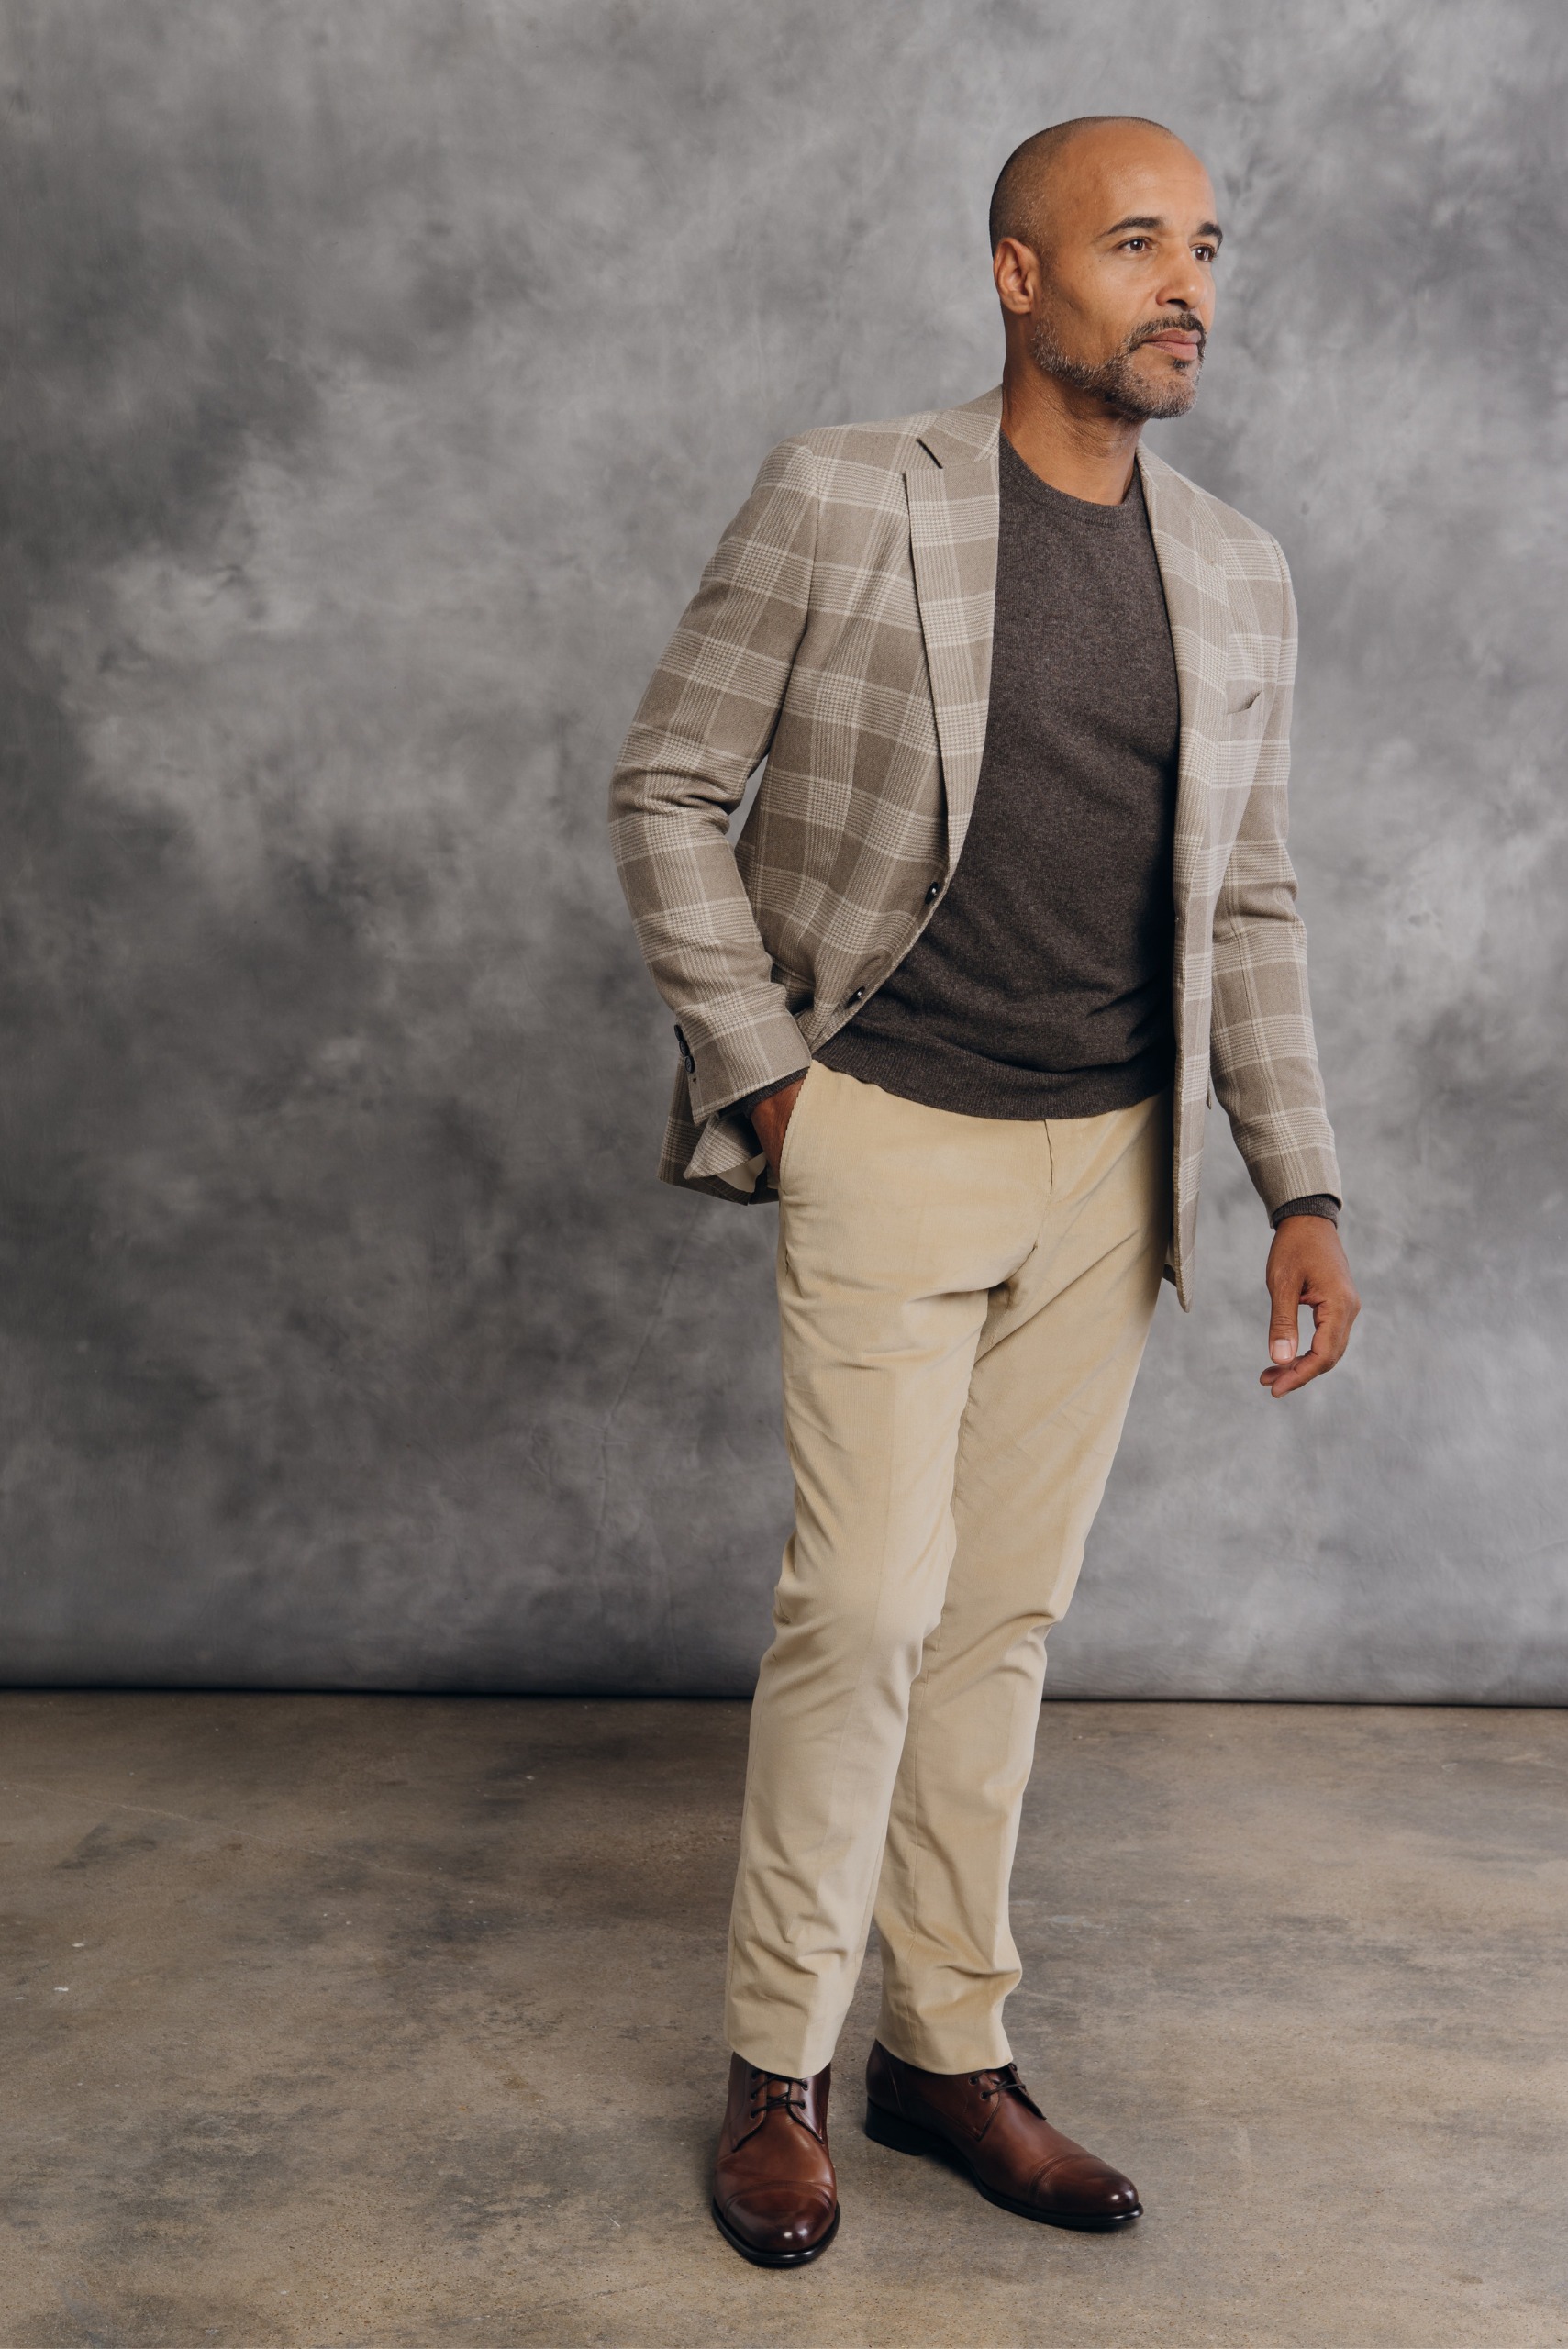 Men's Grey Pants With Shirts Beautiful Combination Outfits 2022